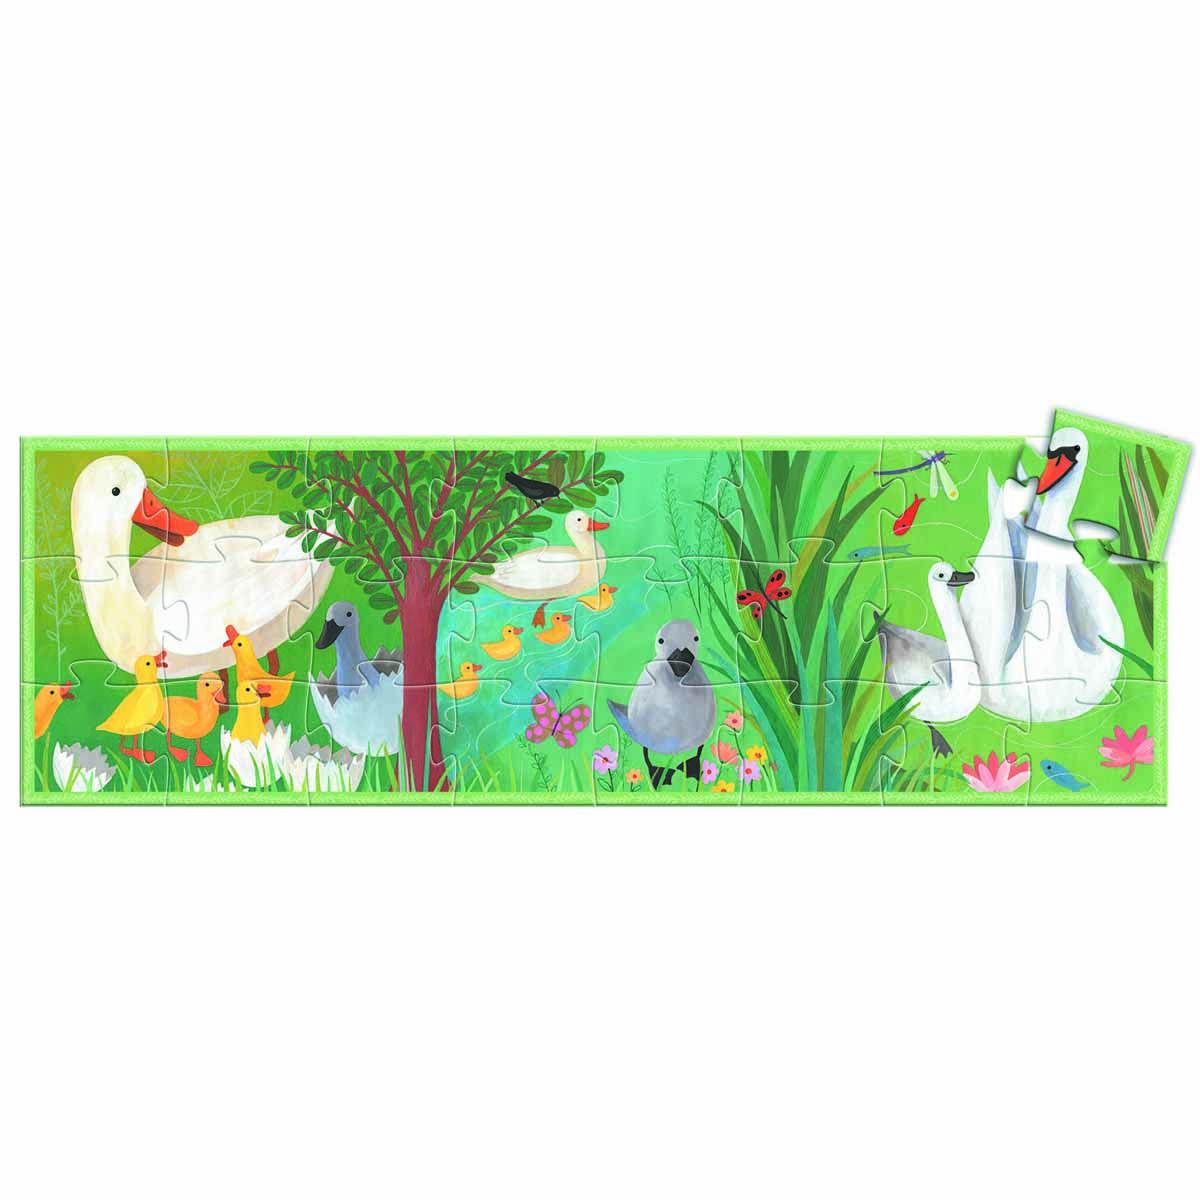 Puzzle SILHOUETTE PUZZLE  THE UGLY DUCKLING 24 PCS 